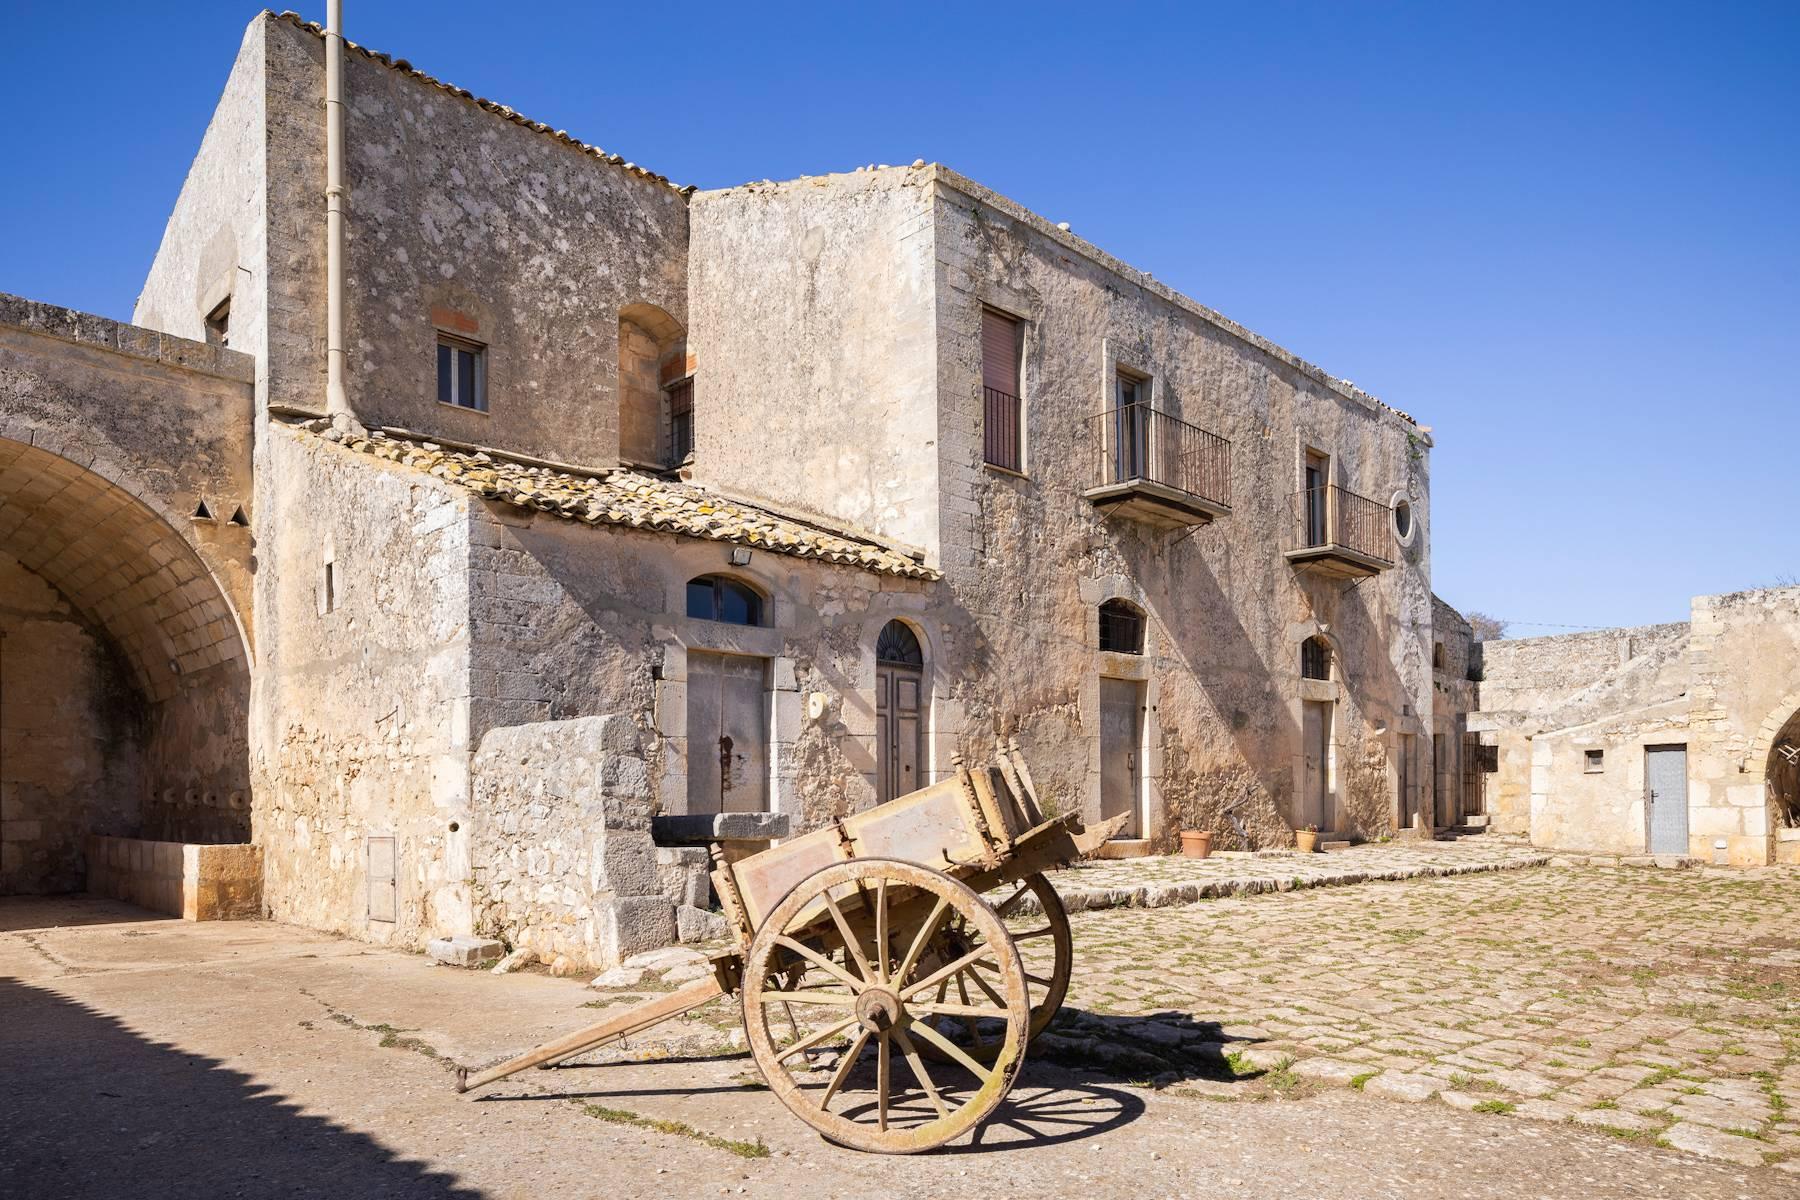 Ancient Sicilian farmhouse from the 1800s - 1